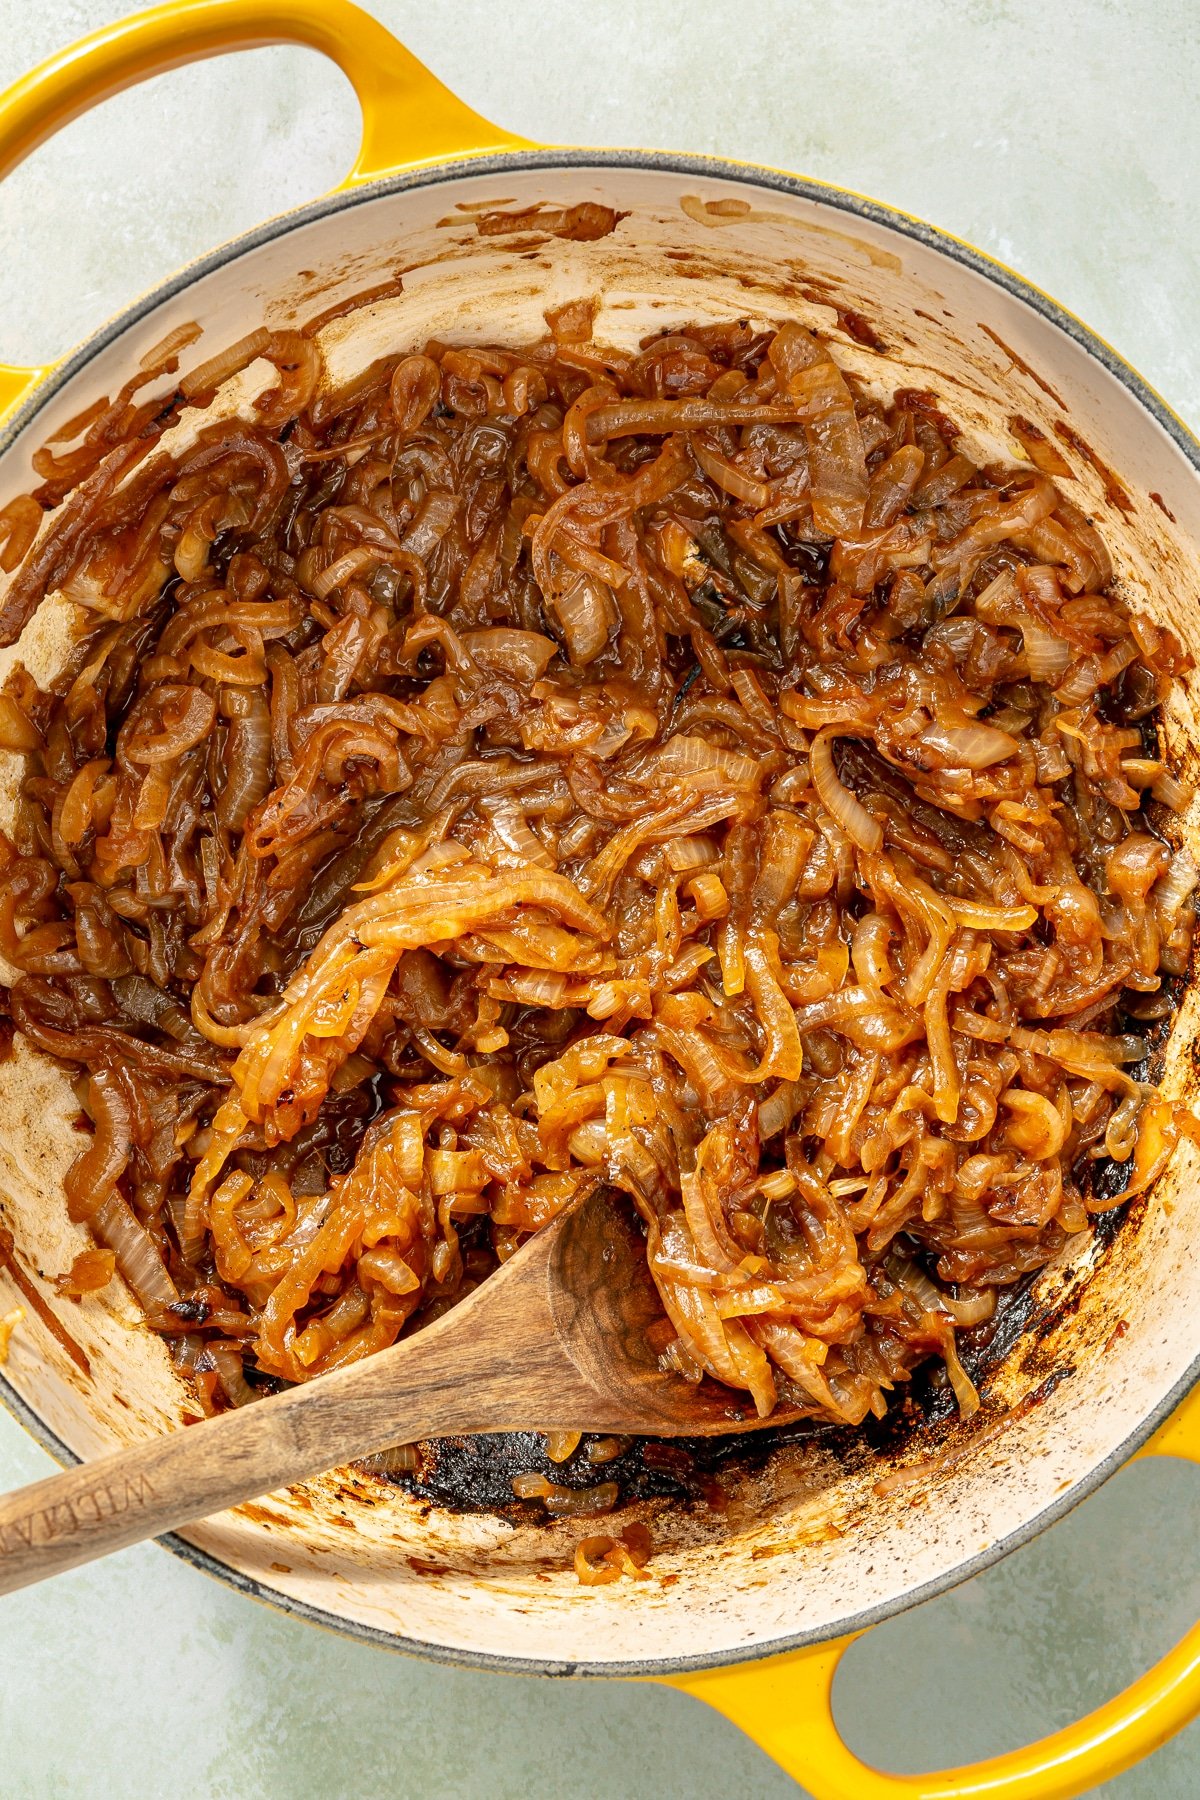 Caramelized onions sit in an enameled pot with yellow handles. A wooden spoon is shown mixing the onions.